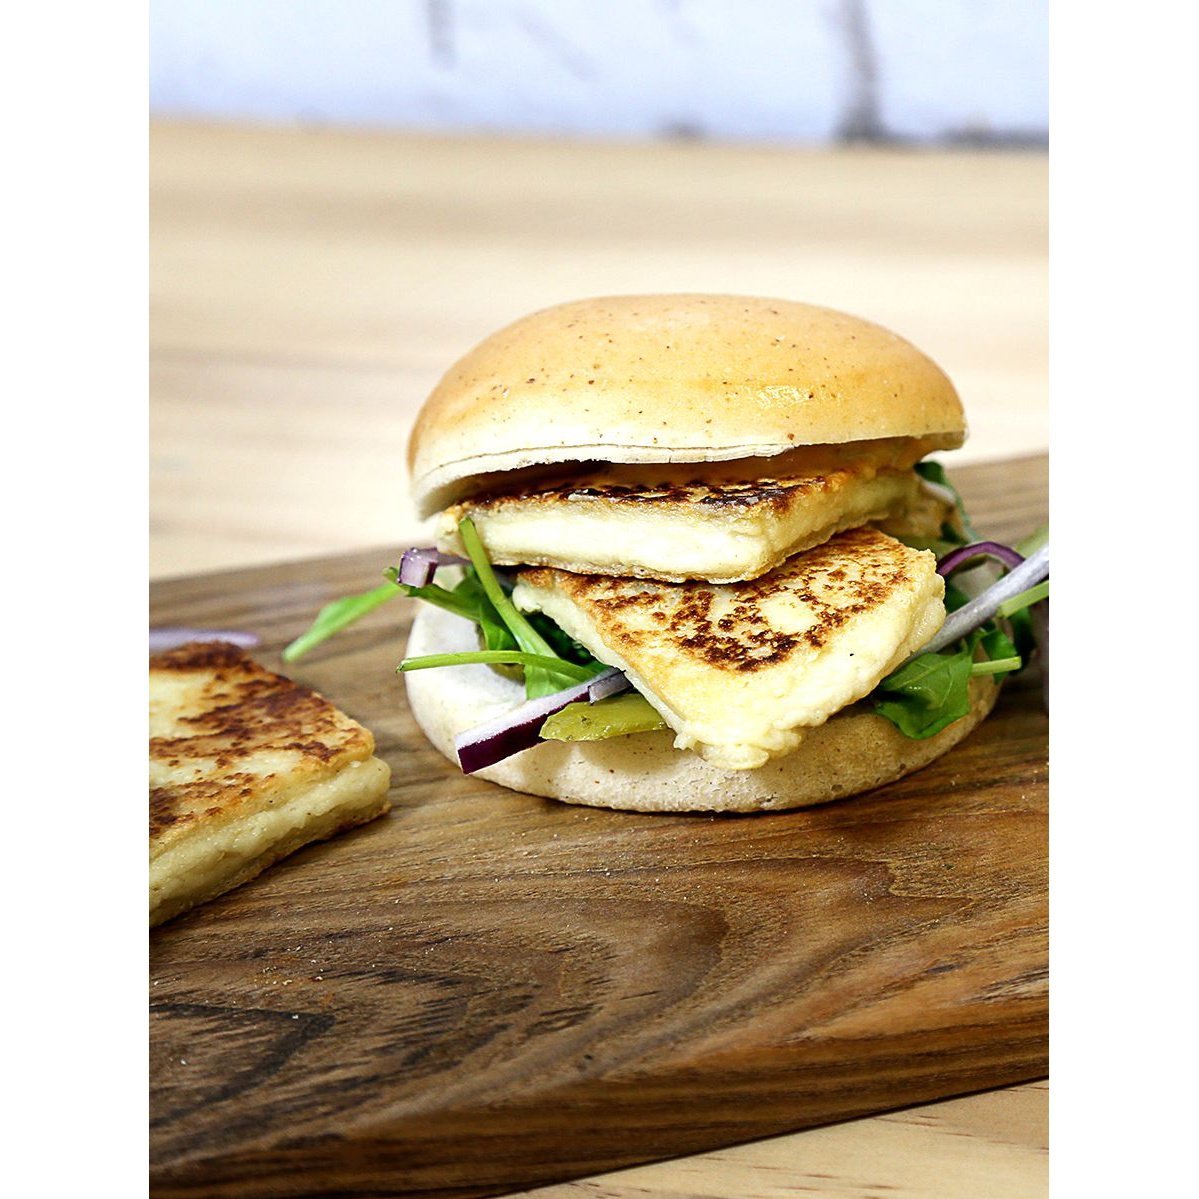 A Burger with Halloumi, Made with the Vegan Cheese Kit from Mad Millie